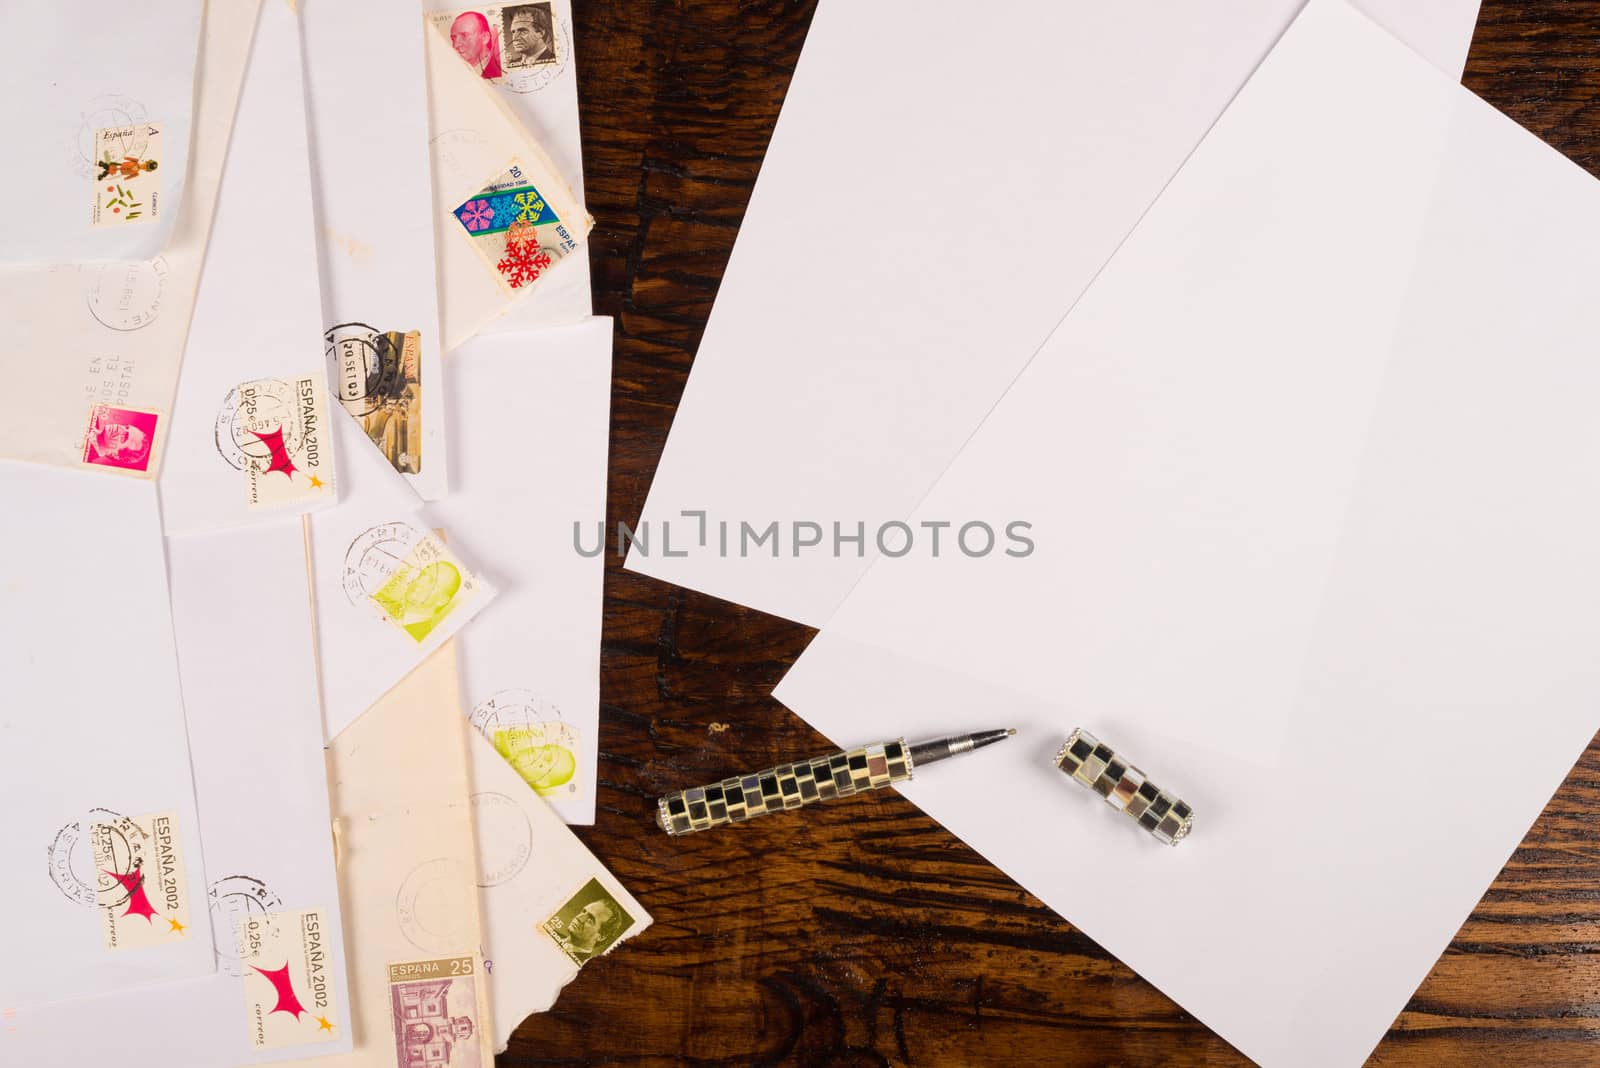 Envelopes, stamps and writing paper from the snail mail times